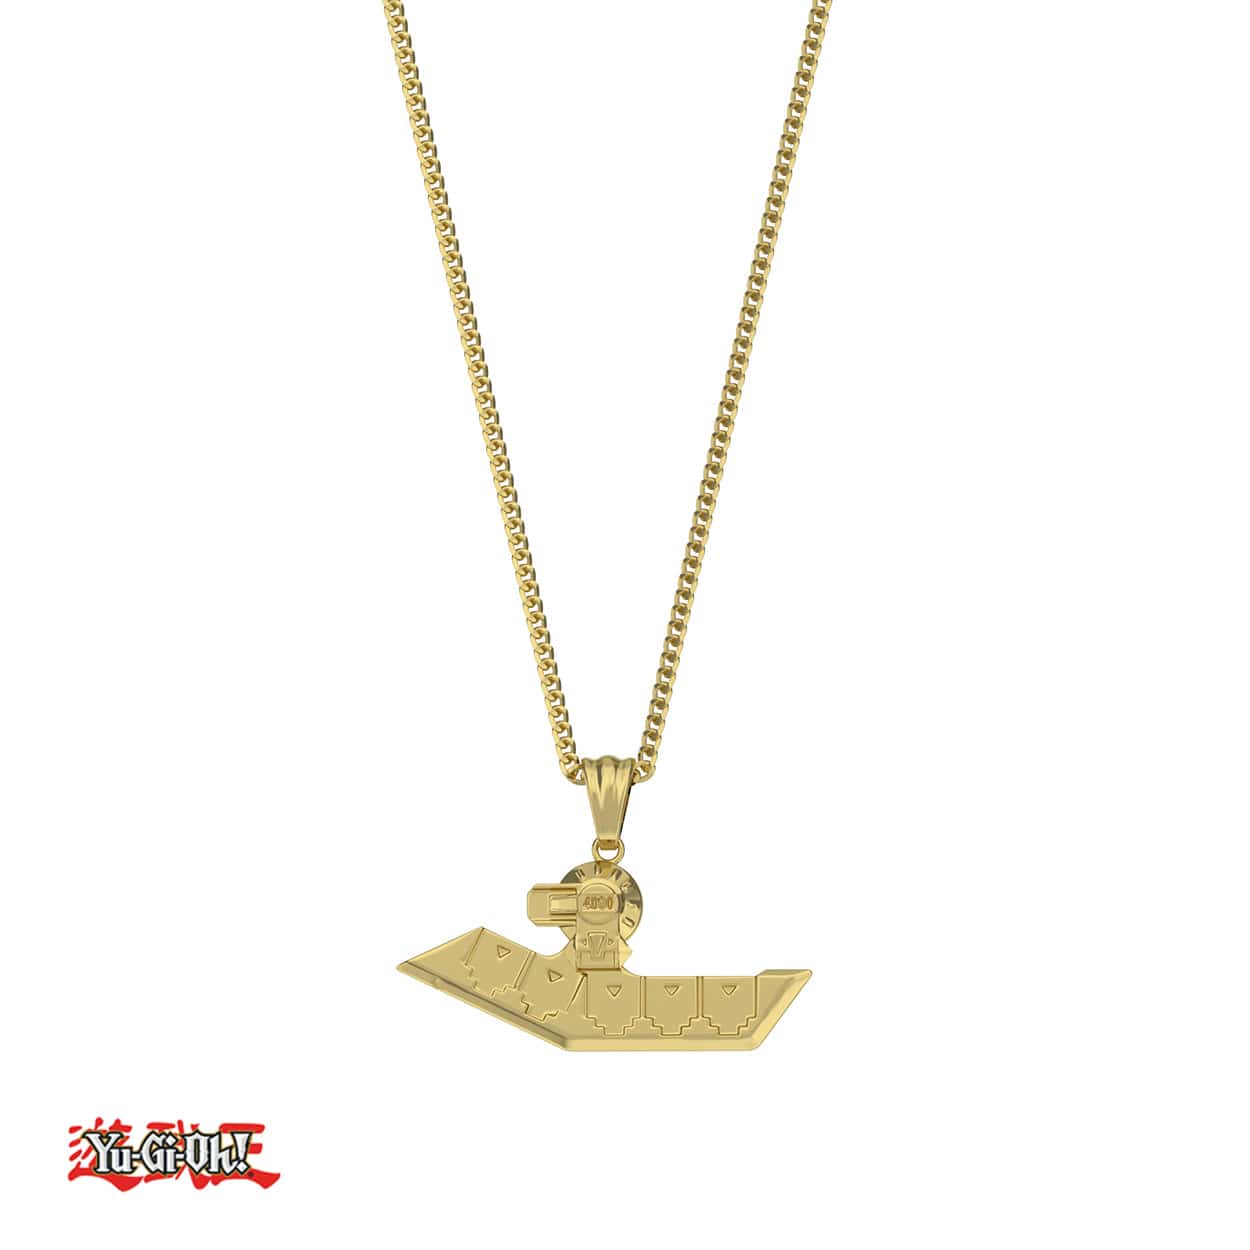 Yu-Gi-Oh!™ City Duel Disk Necklace